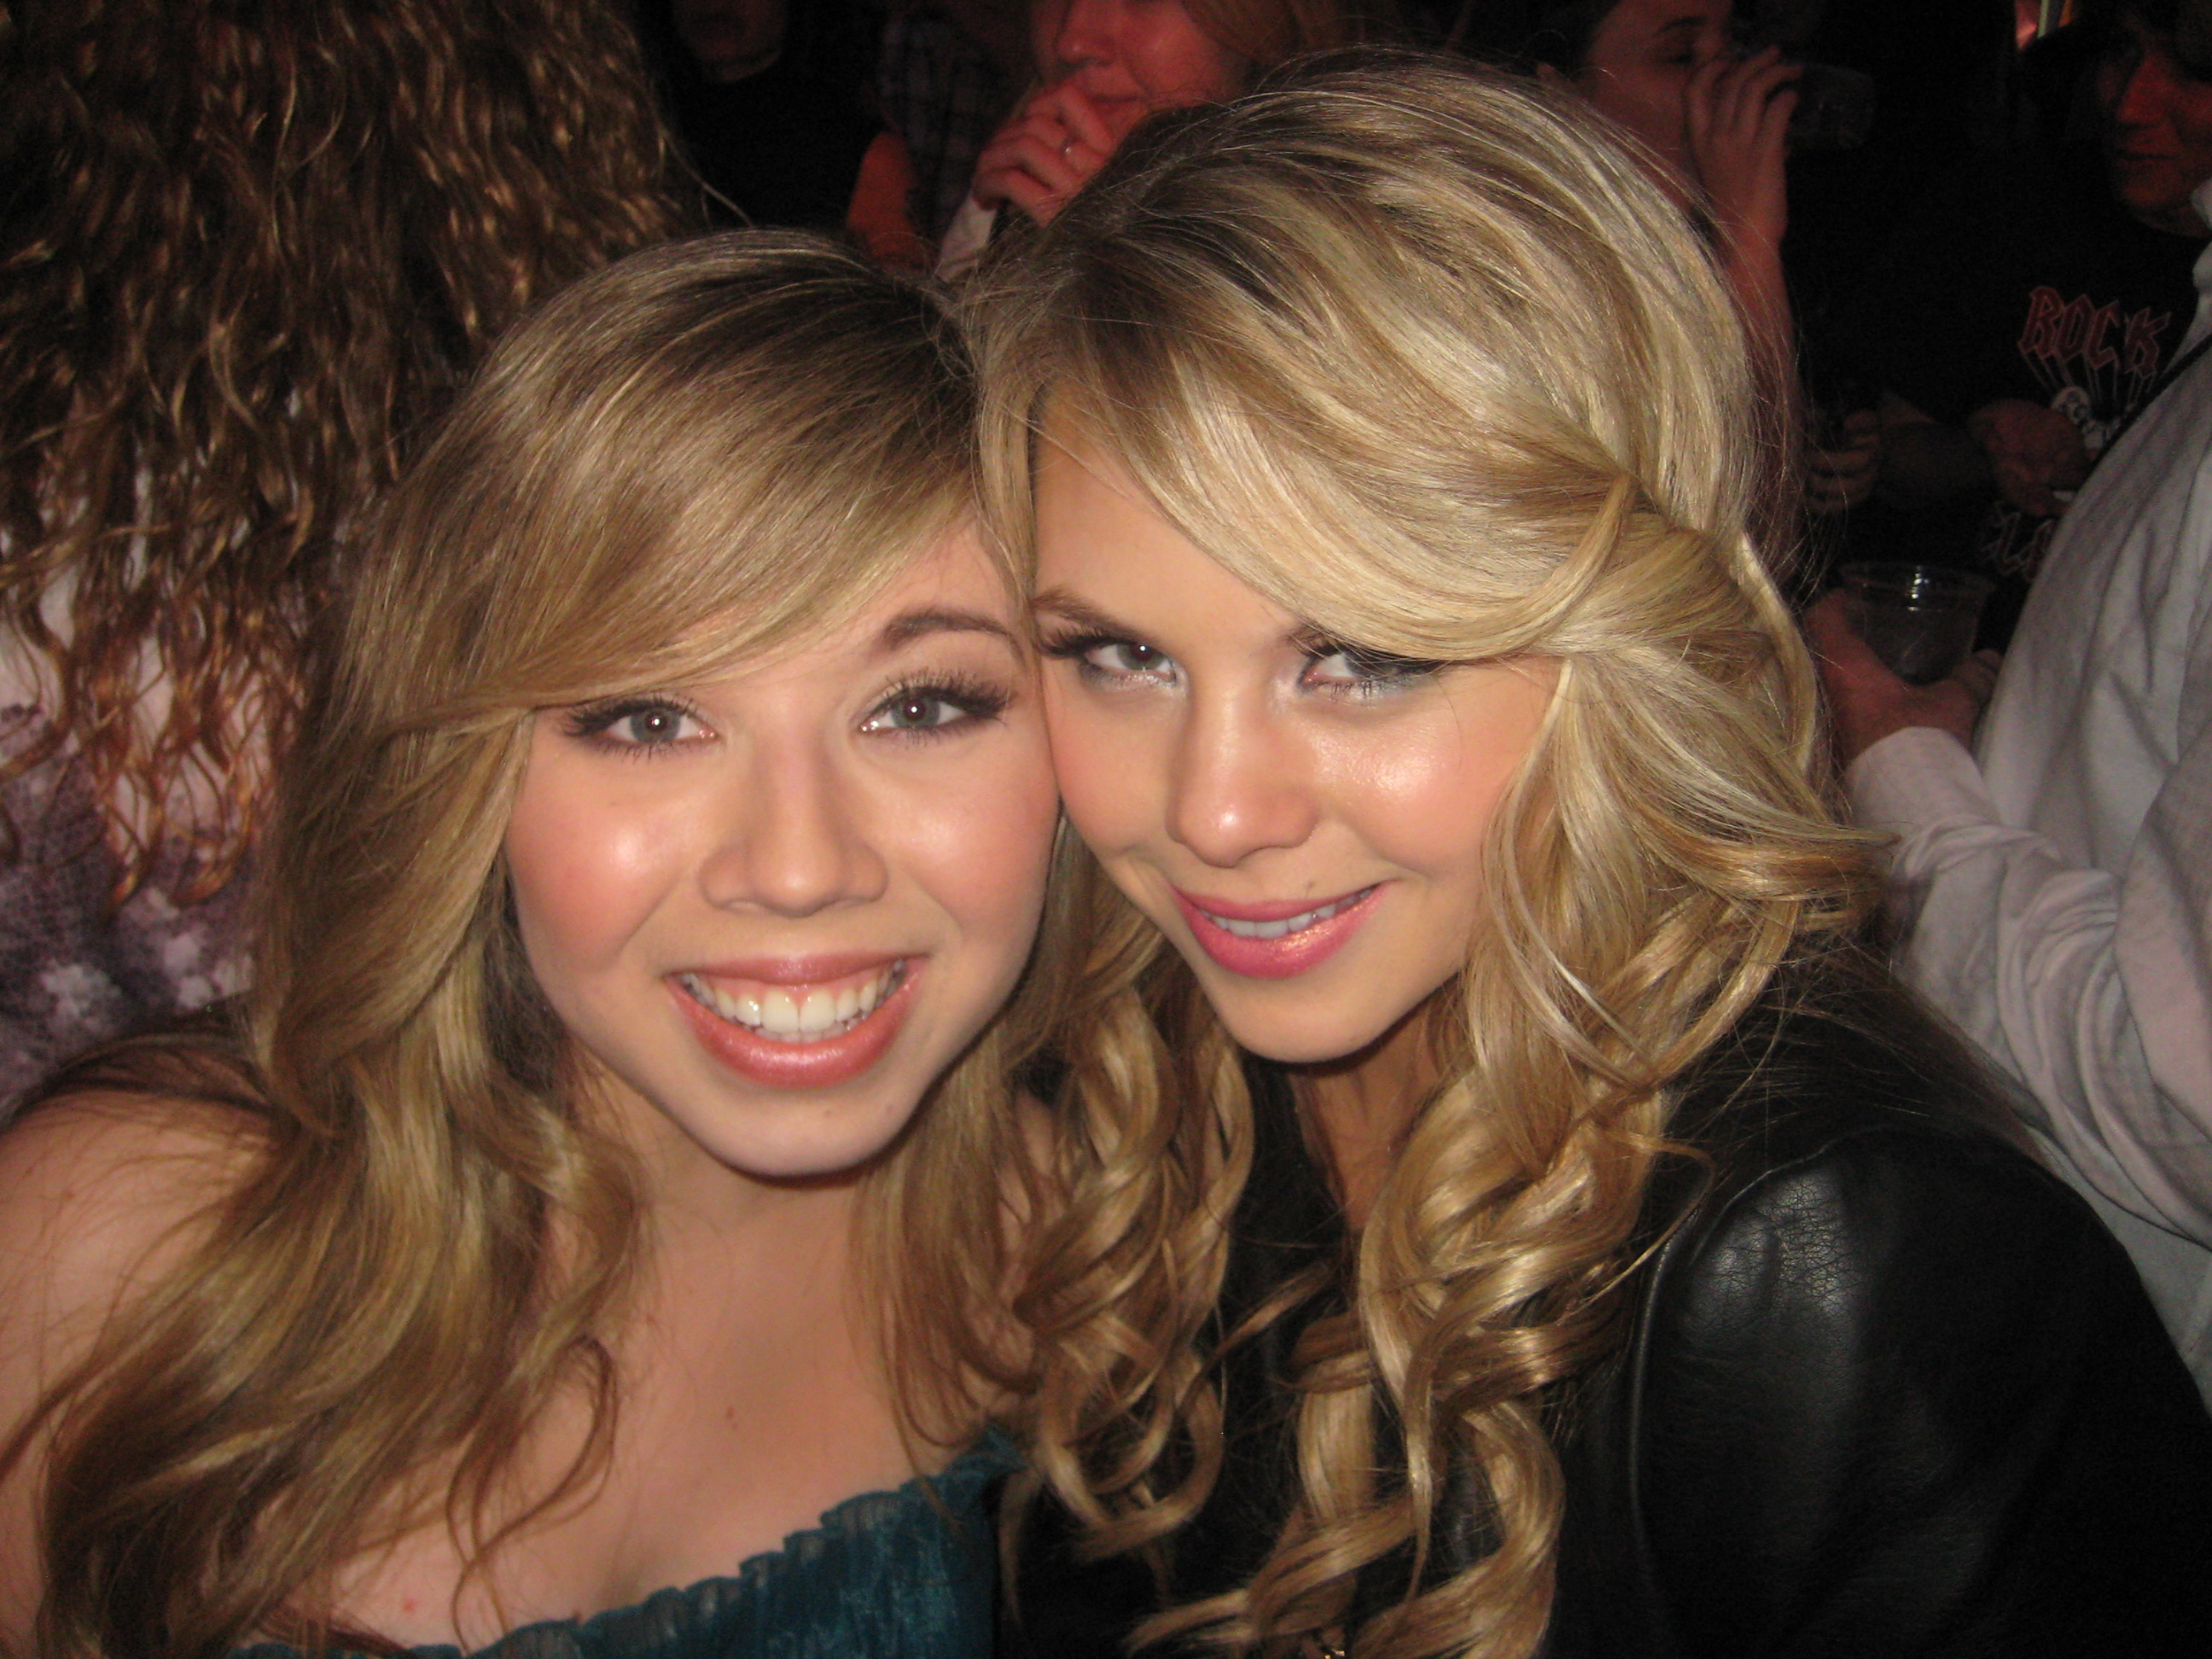 Mason Rae & Jeanettte McCurdy from TV show 